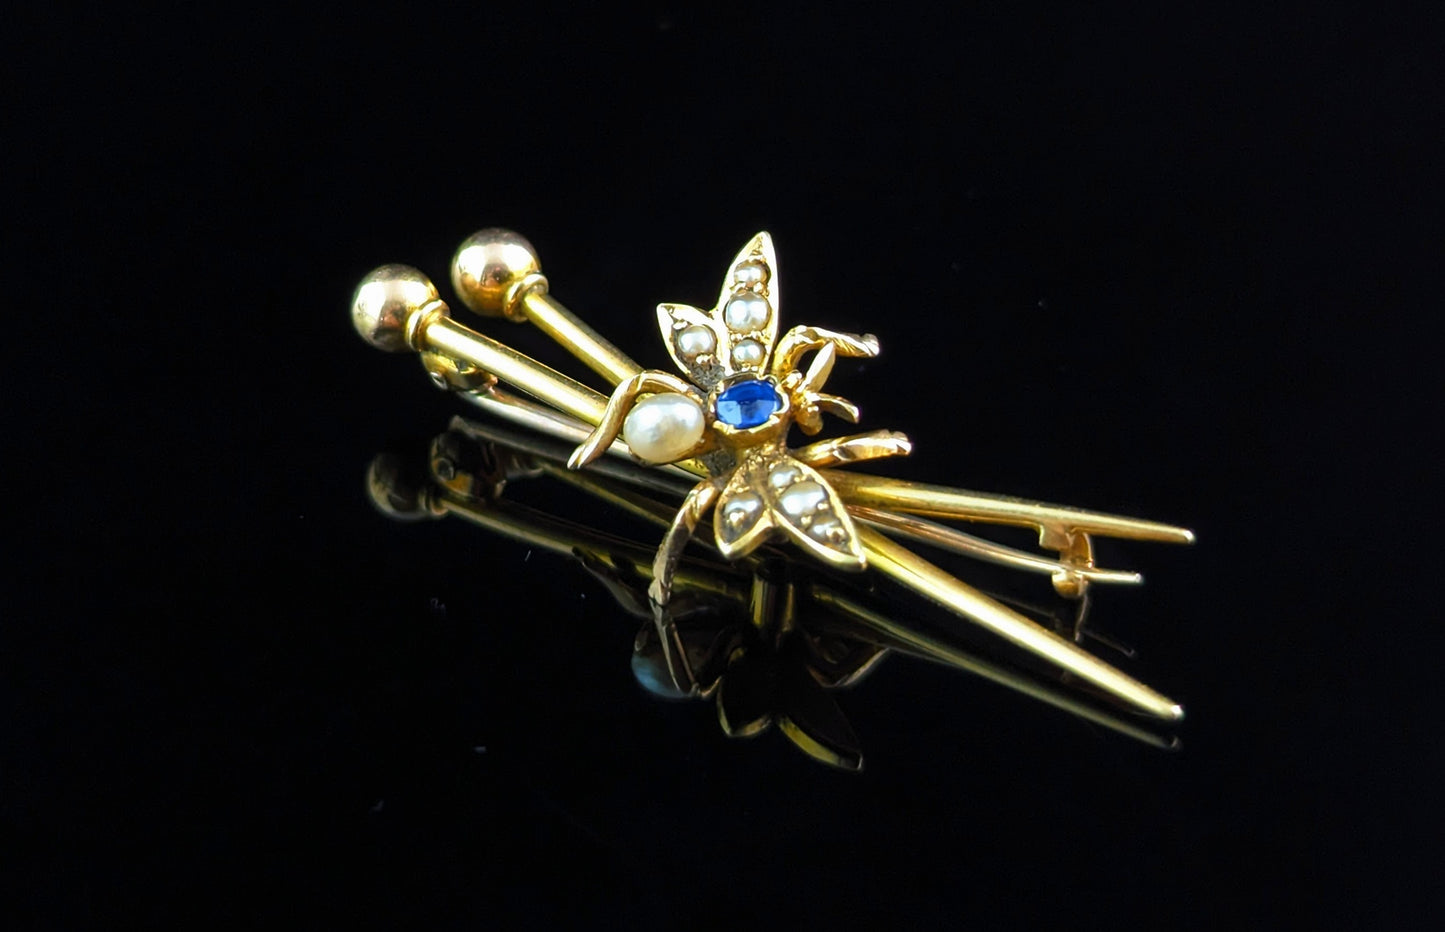 Antique fly brooch, crossed needles, Sapphire and Pearl, 15k gold